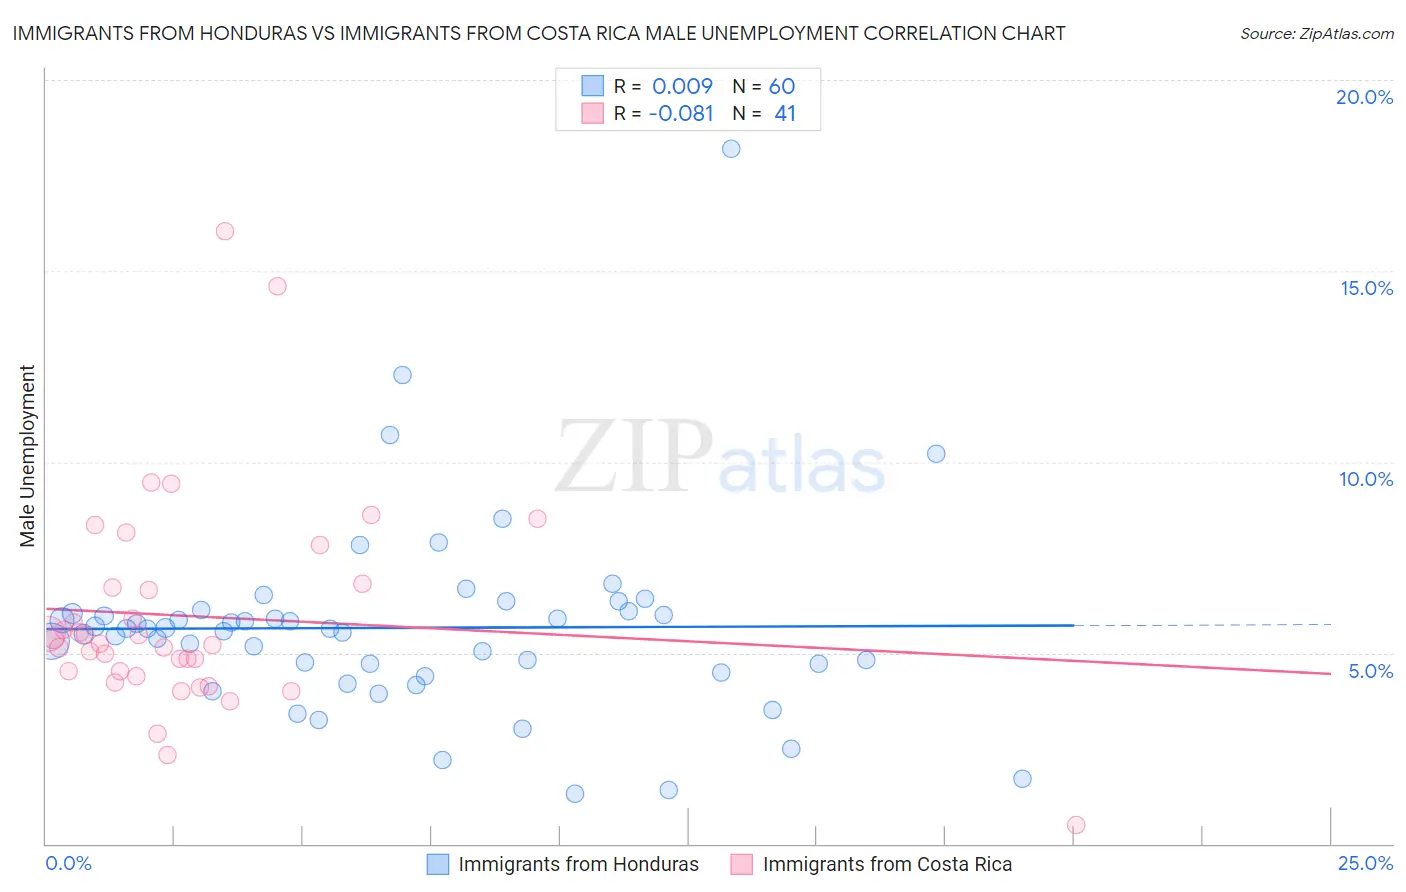 Immigrants from Honduras vs Immigrants from Costa Rica Male Unemployment